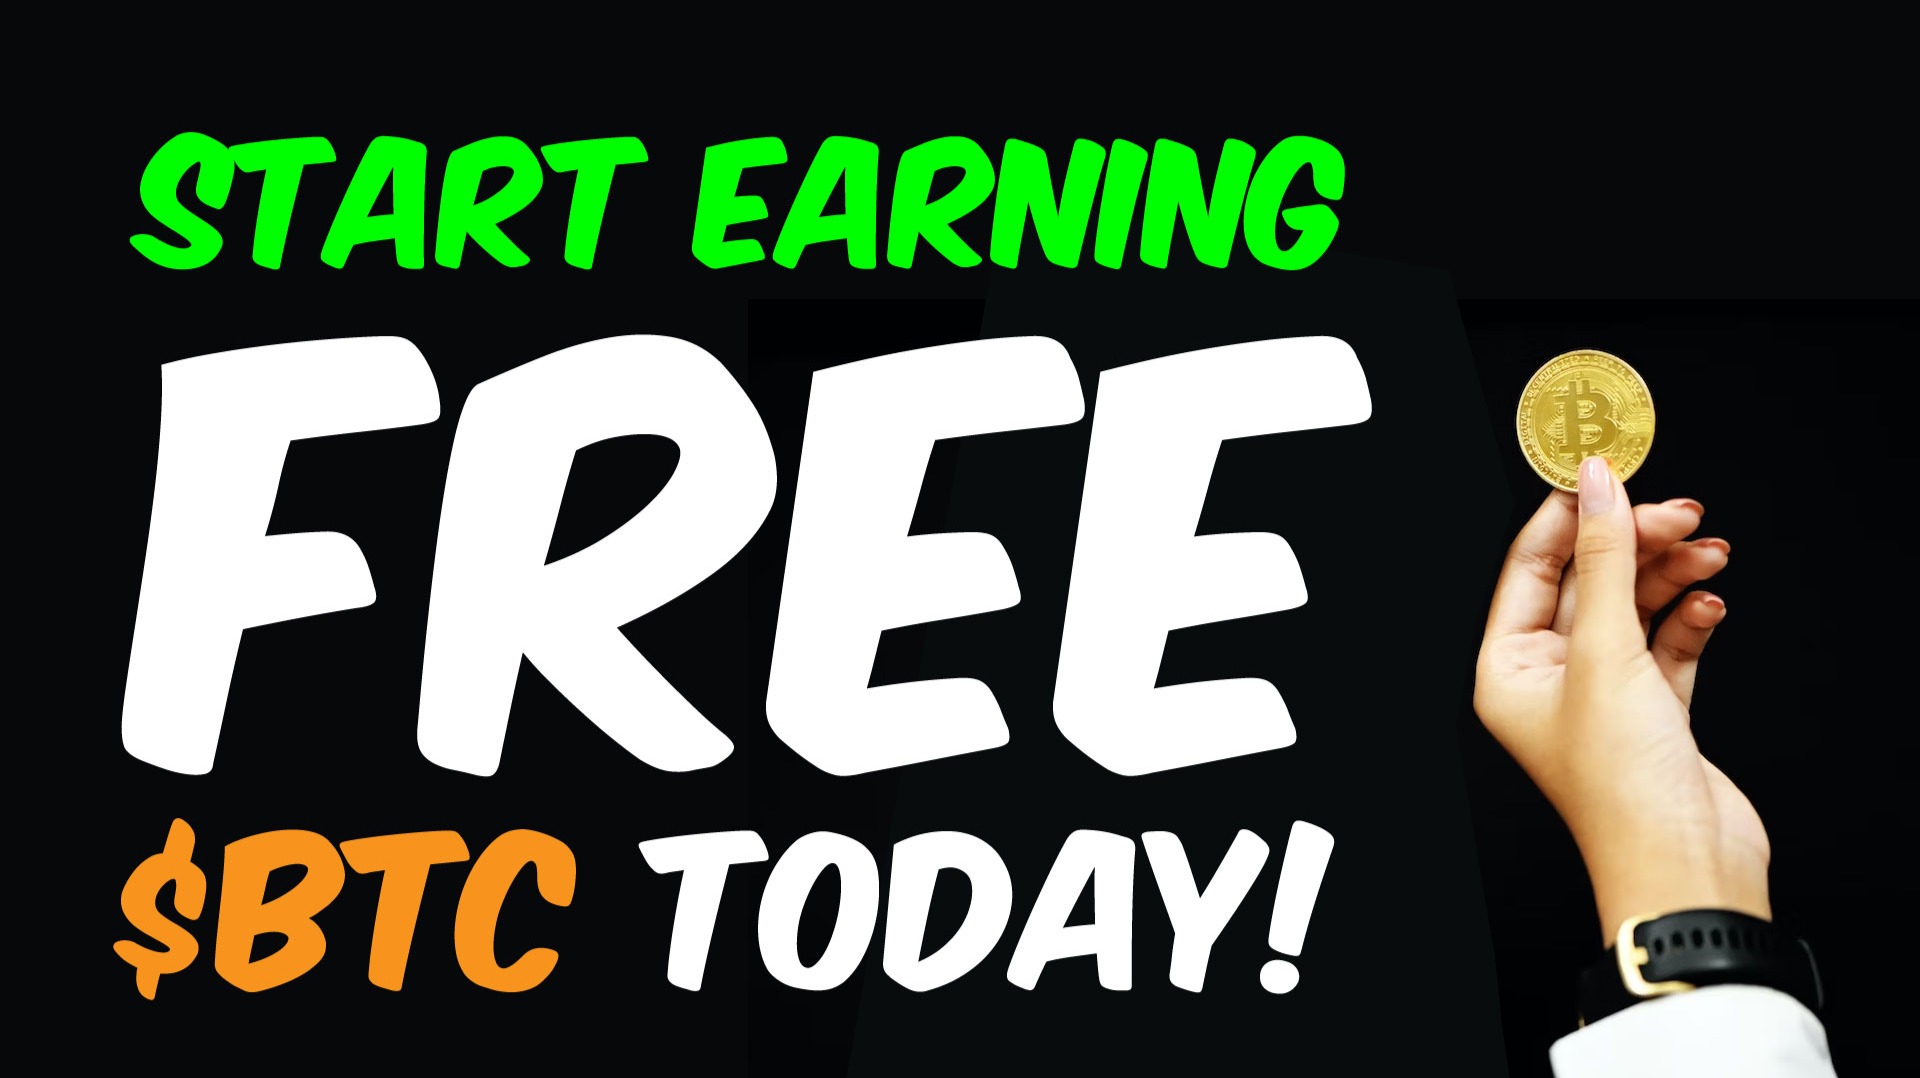 How Can You Earn Free Bitcoin? Best Ways to Earn for | Cryptopolitan